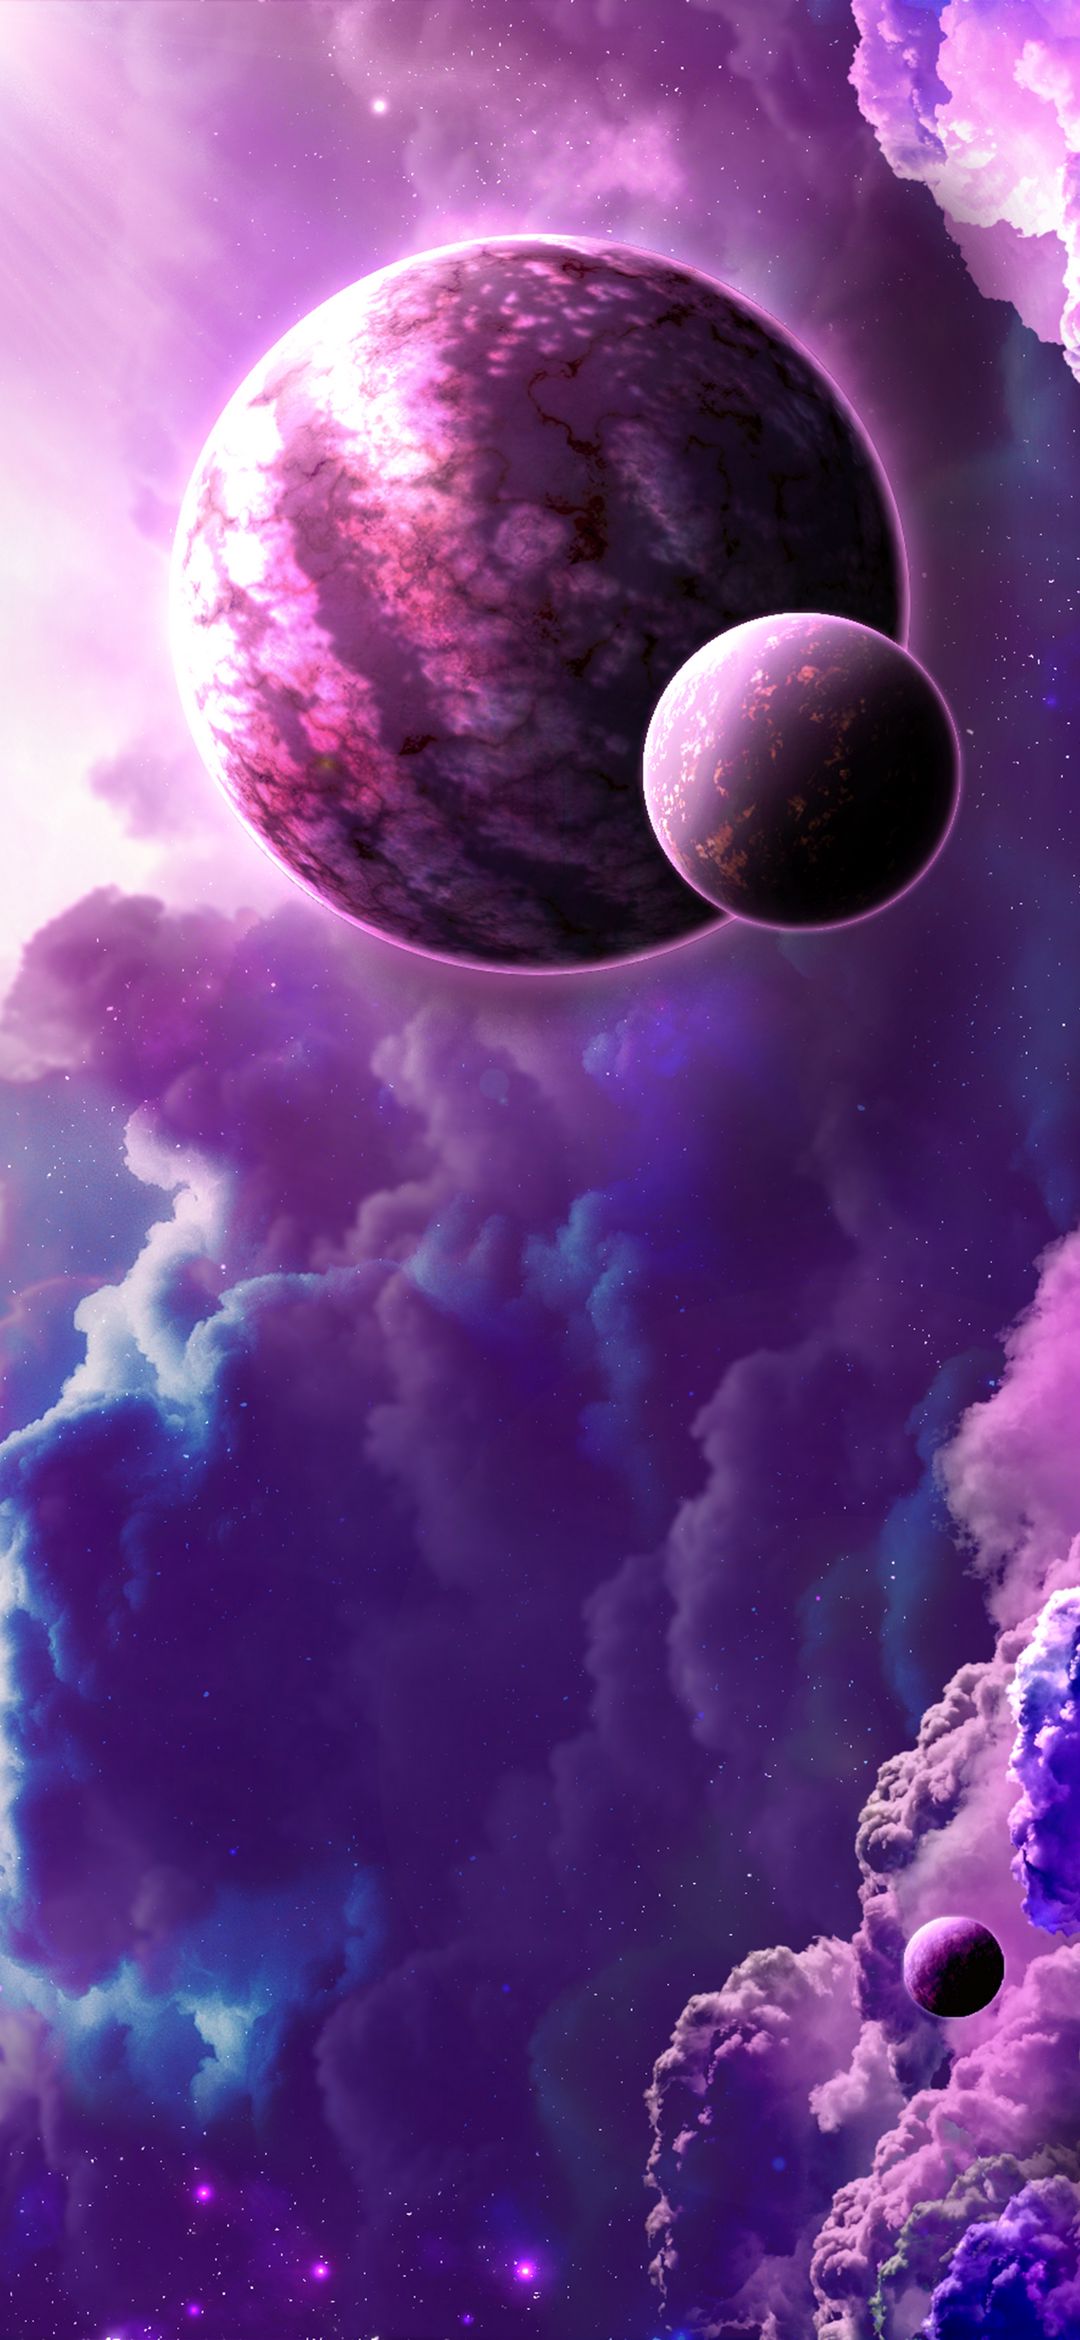 Space aesthetics  Galaxy wallpaper iphone Wallpaper space Planets  wallpaper